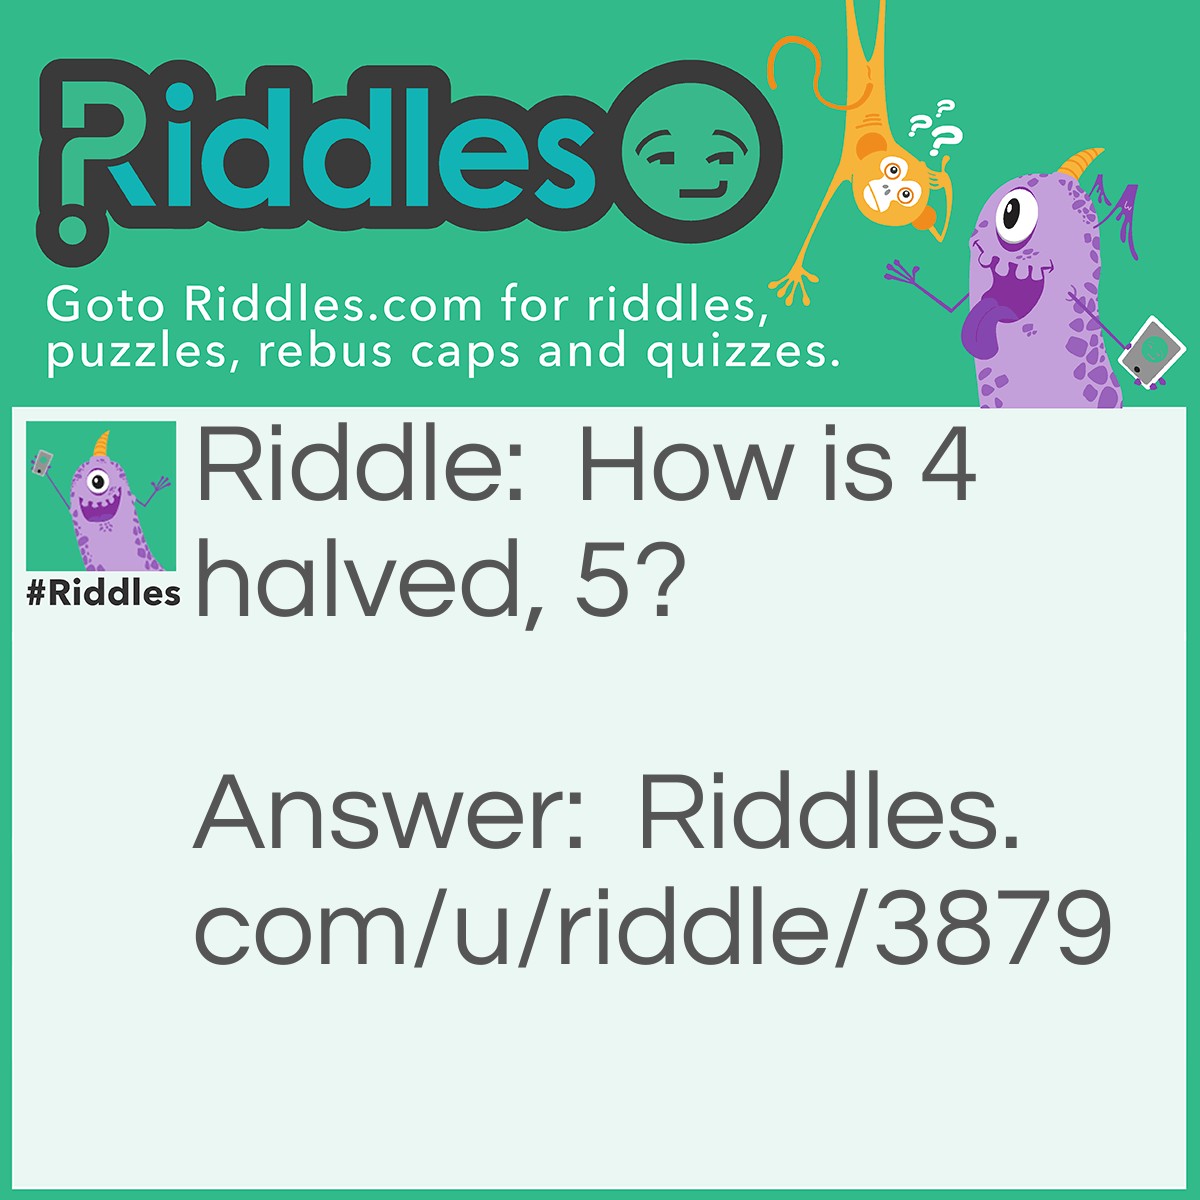 Riddle: How is 4 halved, 5? Answer: 4 is IIII tick marks and drawing a line through it diagonally is how you draw 5 tick marks and also halves the 4 marks.